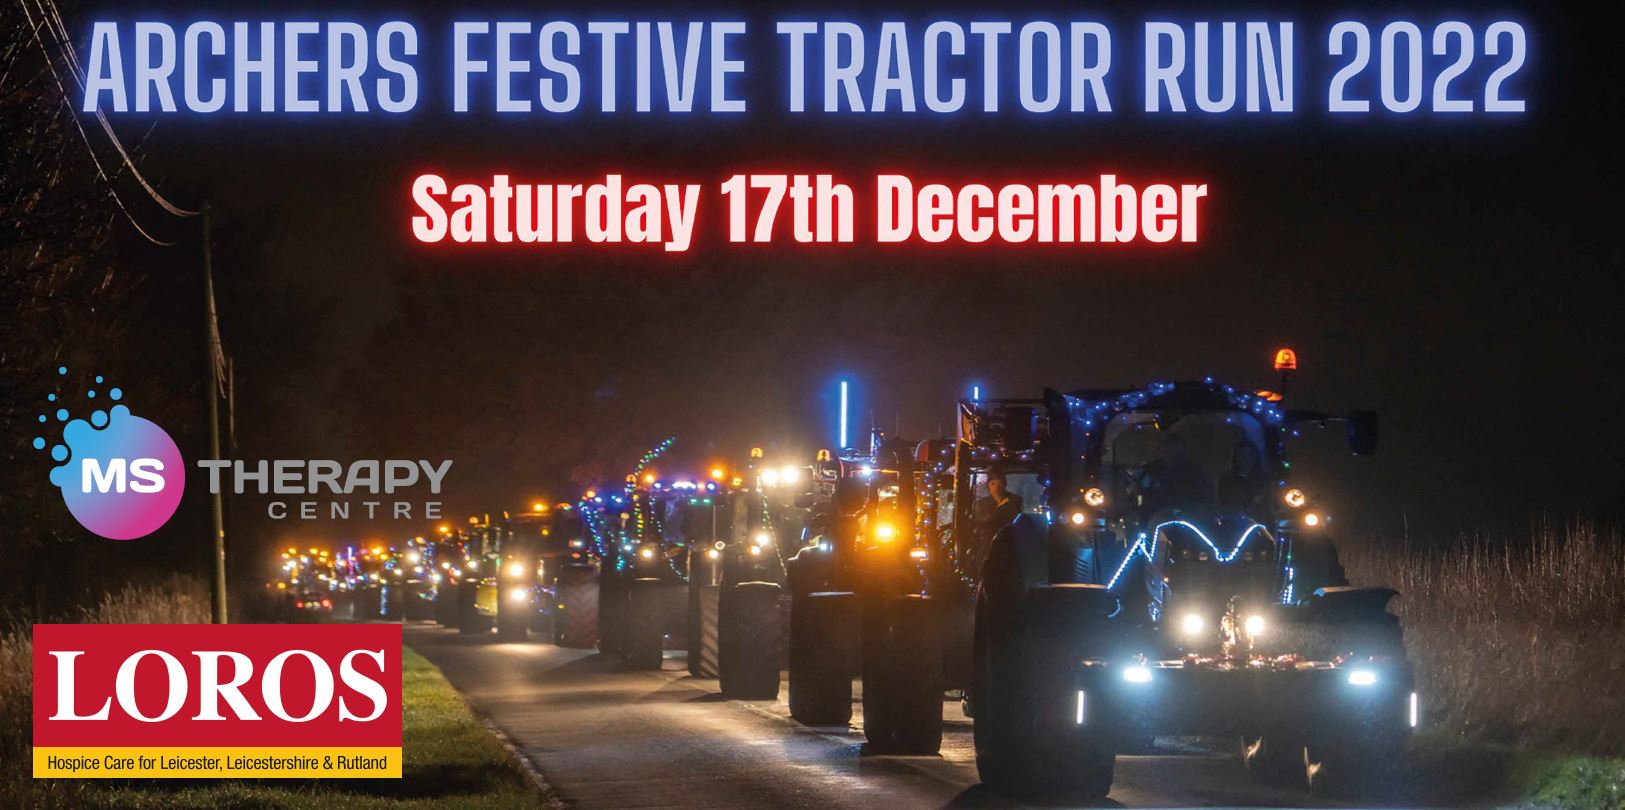 Donate to the 2022 Archers Festive Tractor Run Supporting LOROS Hospice and Leicestershire MS Therapy Centre (Working together to make much needed funds). Enthuse will ask you to cover their processing fees, you can select other and type 0%.